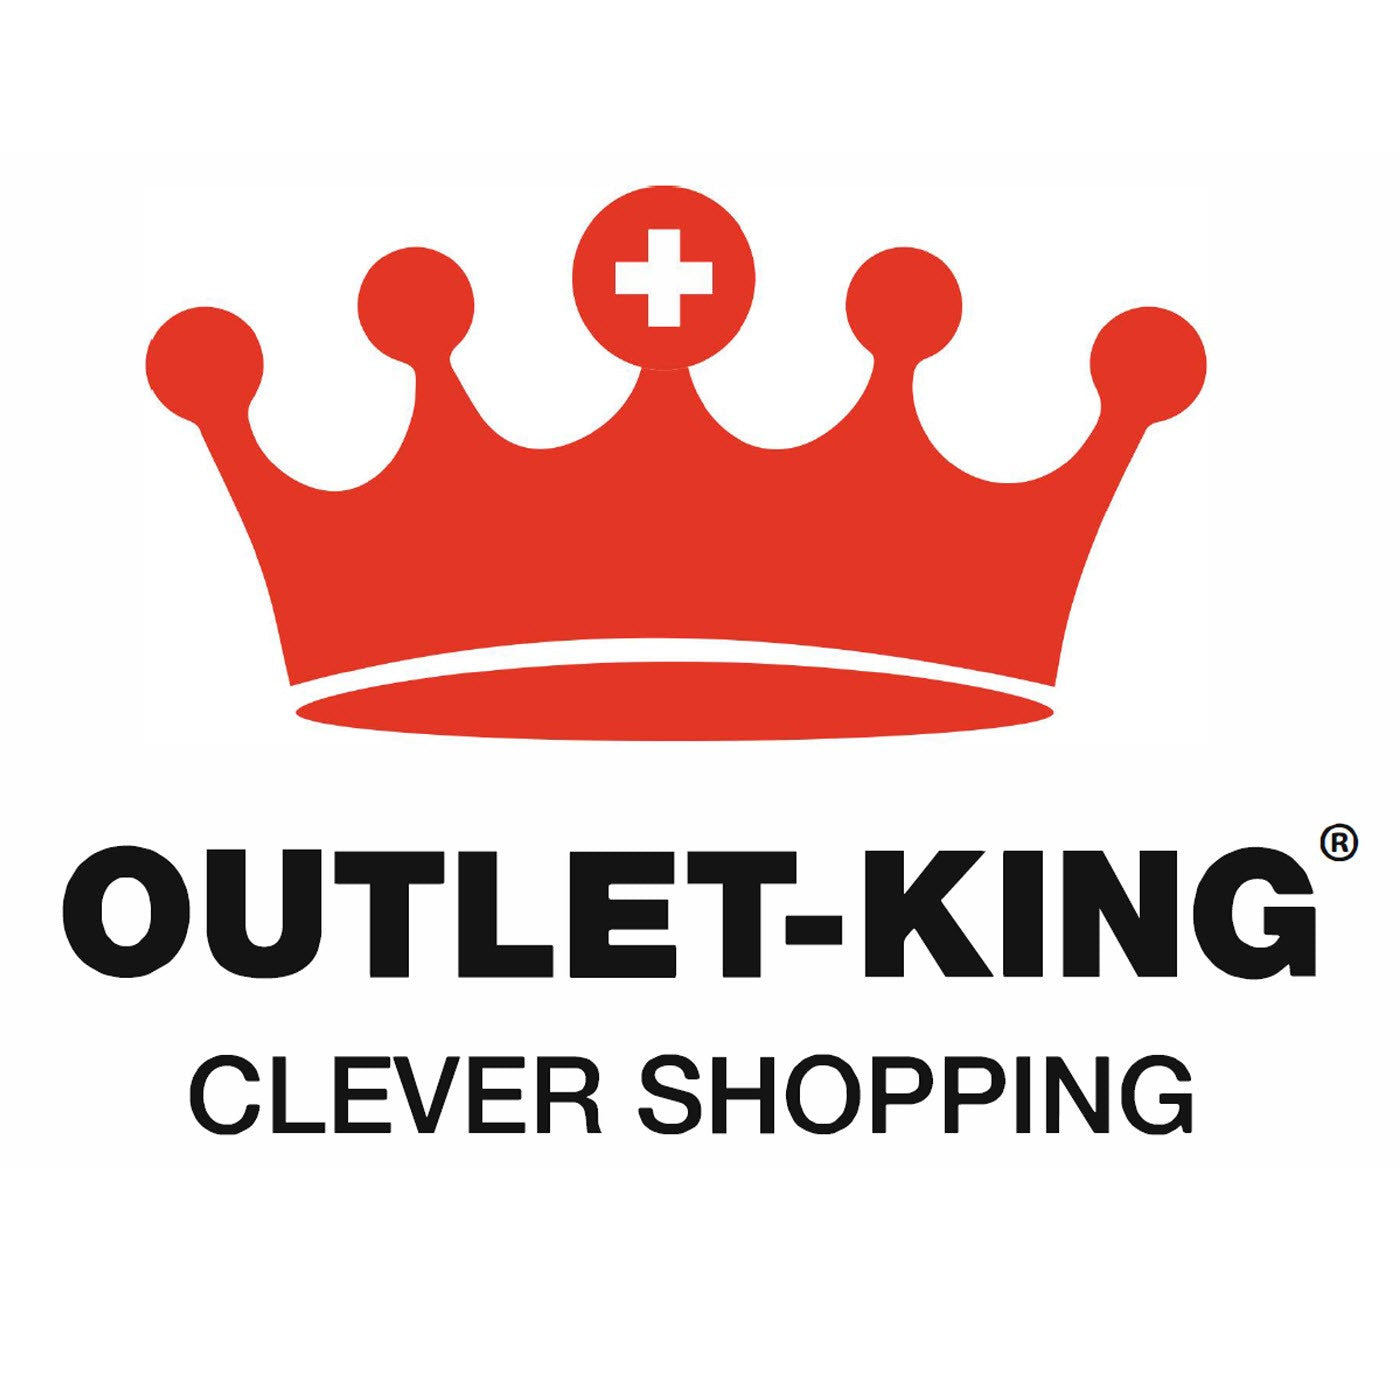 (c) Outletking.ch